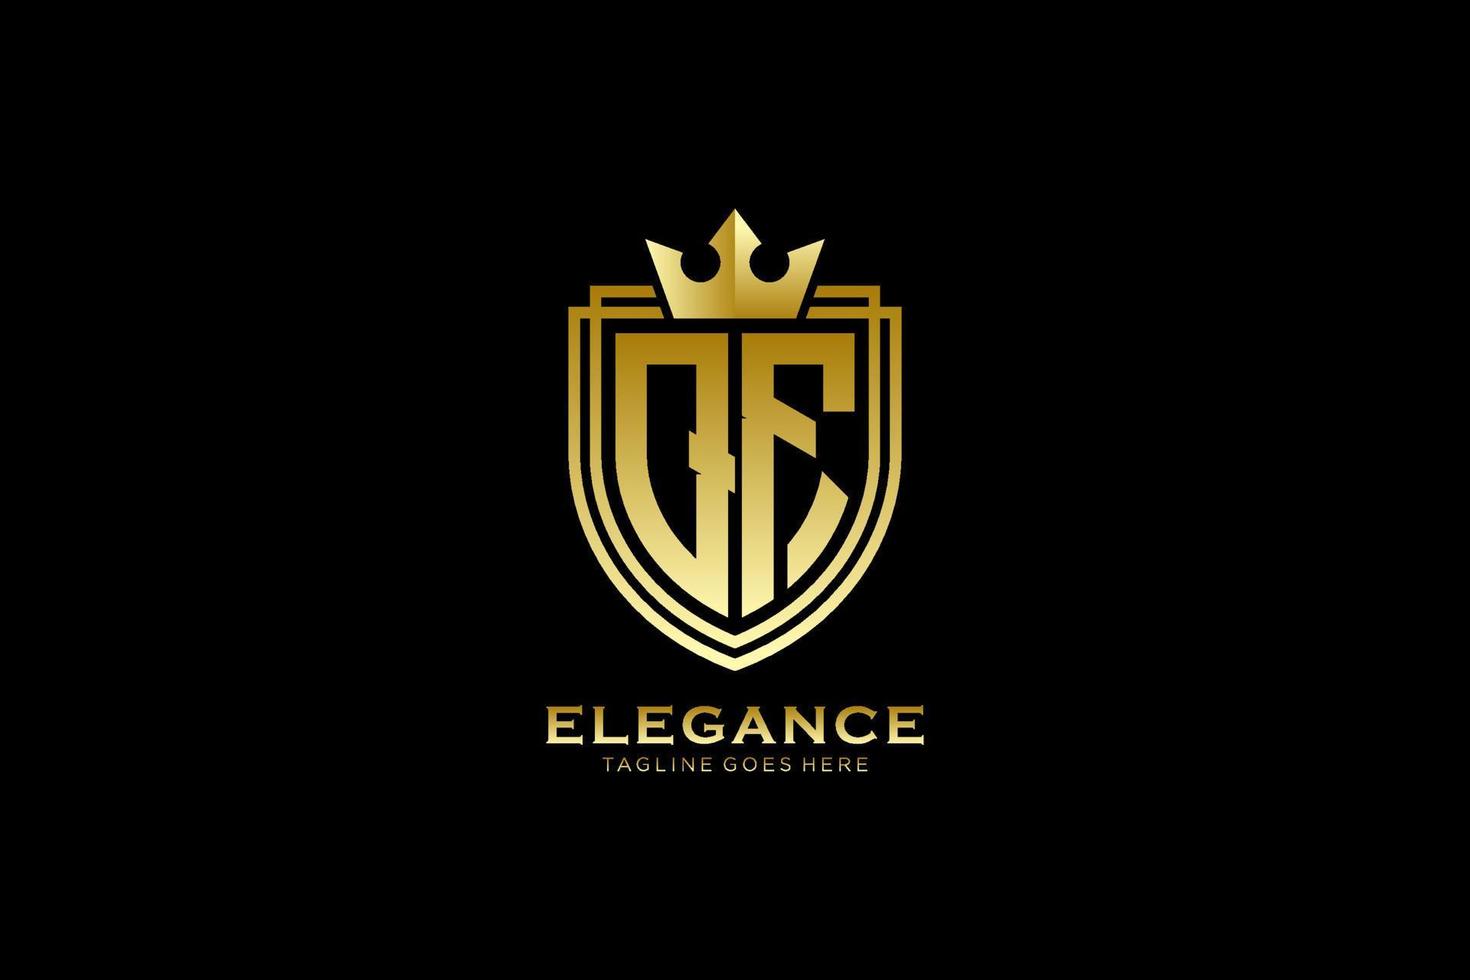 initial QF elegant luxury monogram logo or badge template with scrolls and royal crown - perfect for luxurious branding projects vector